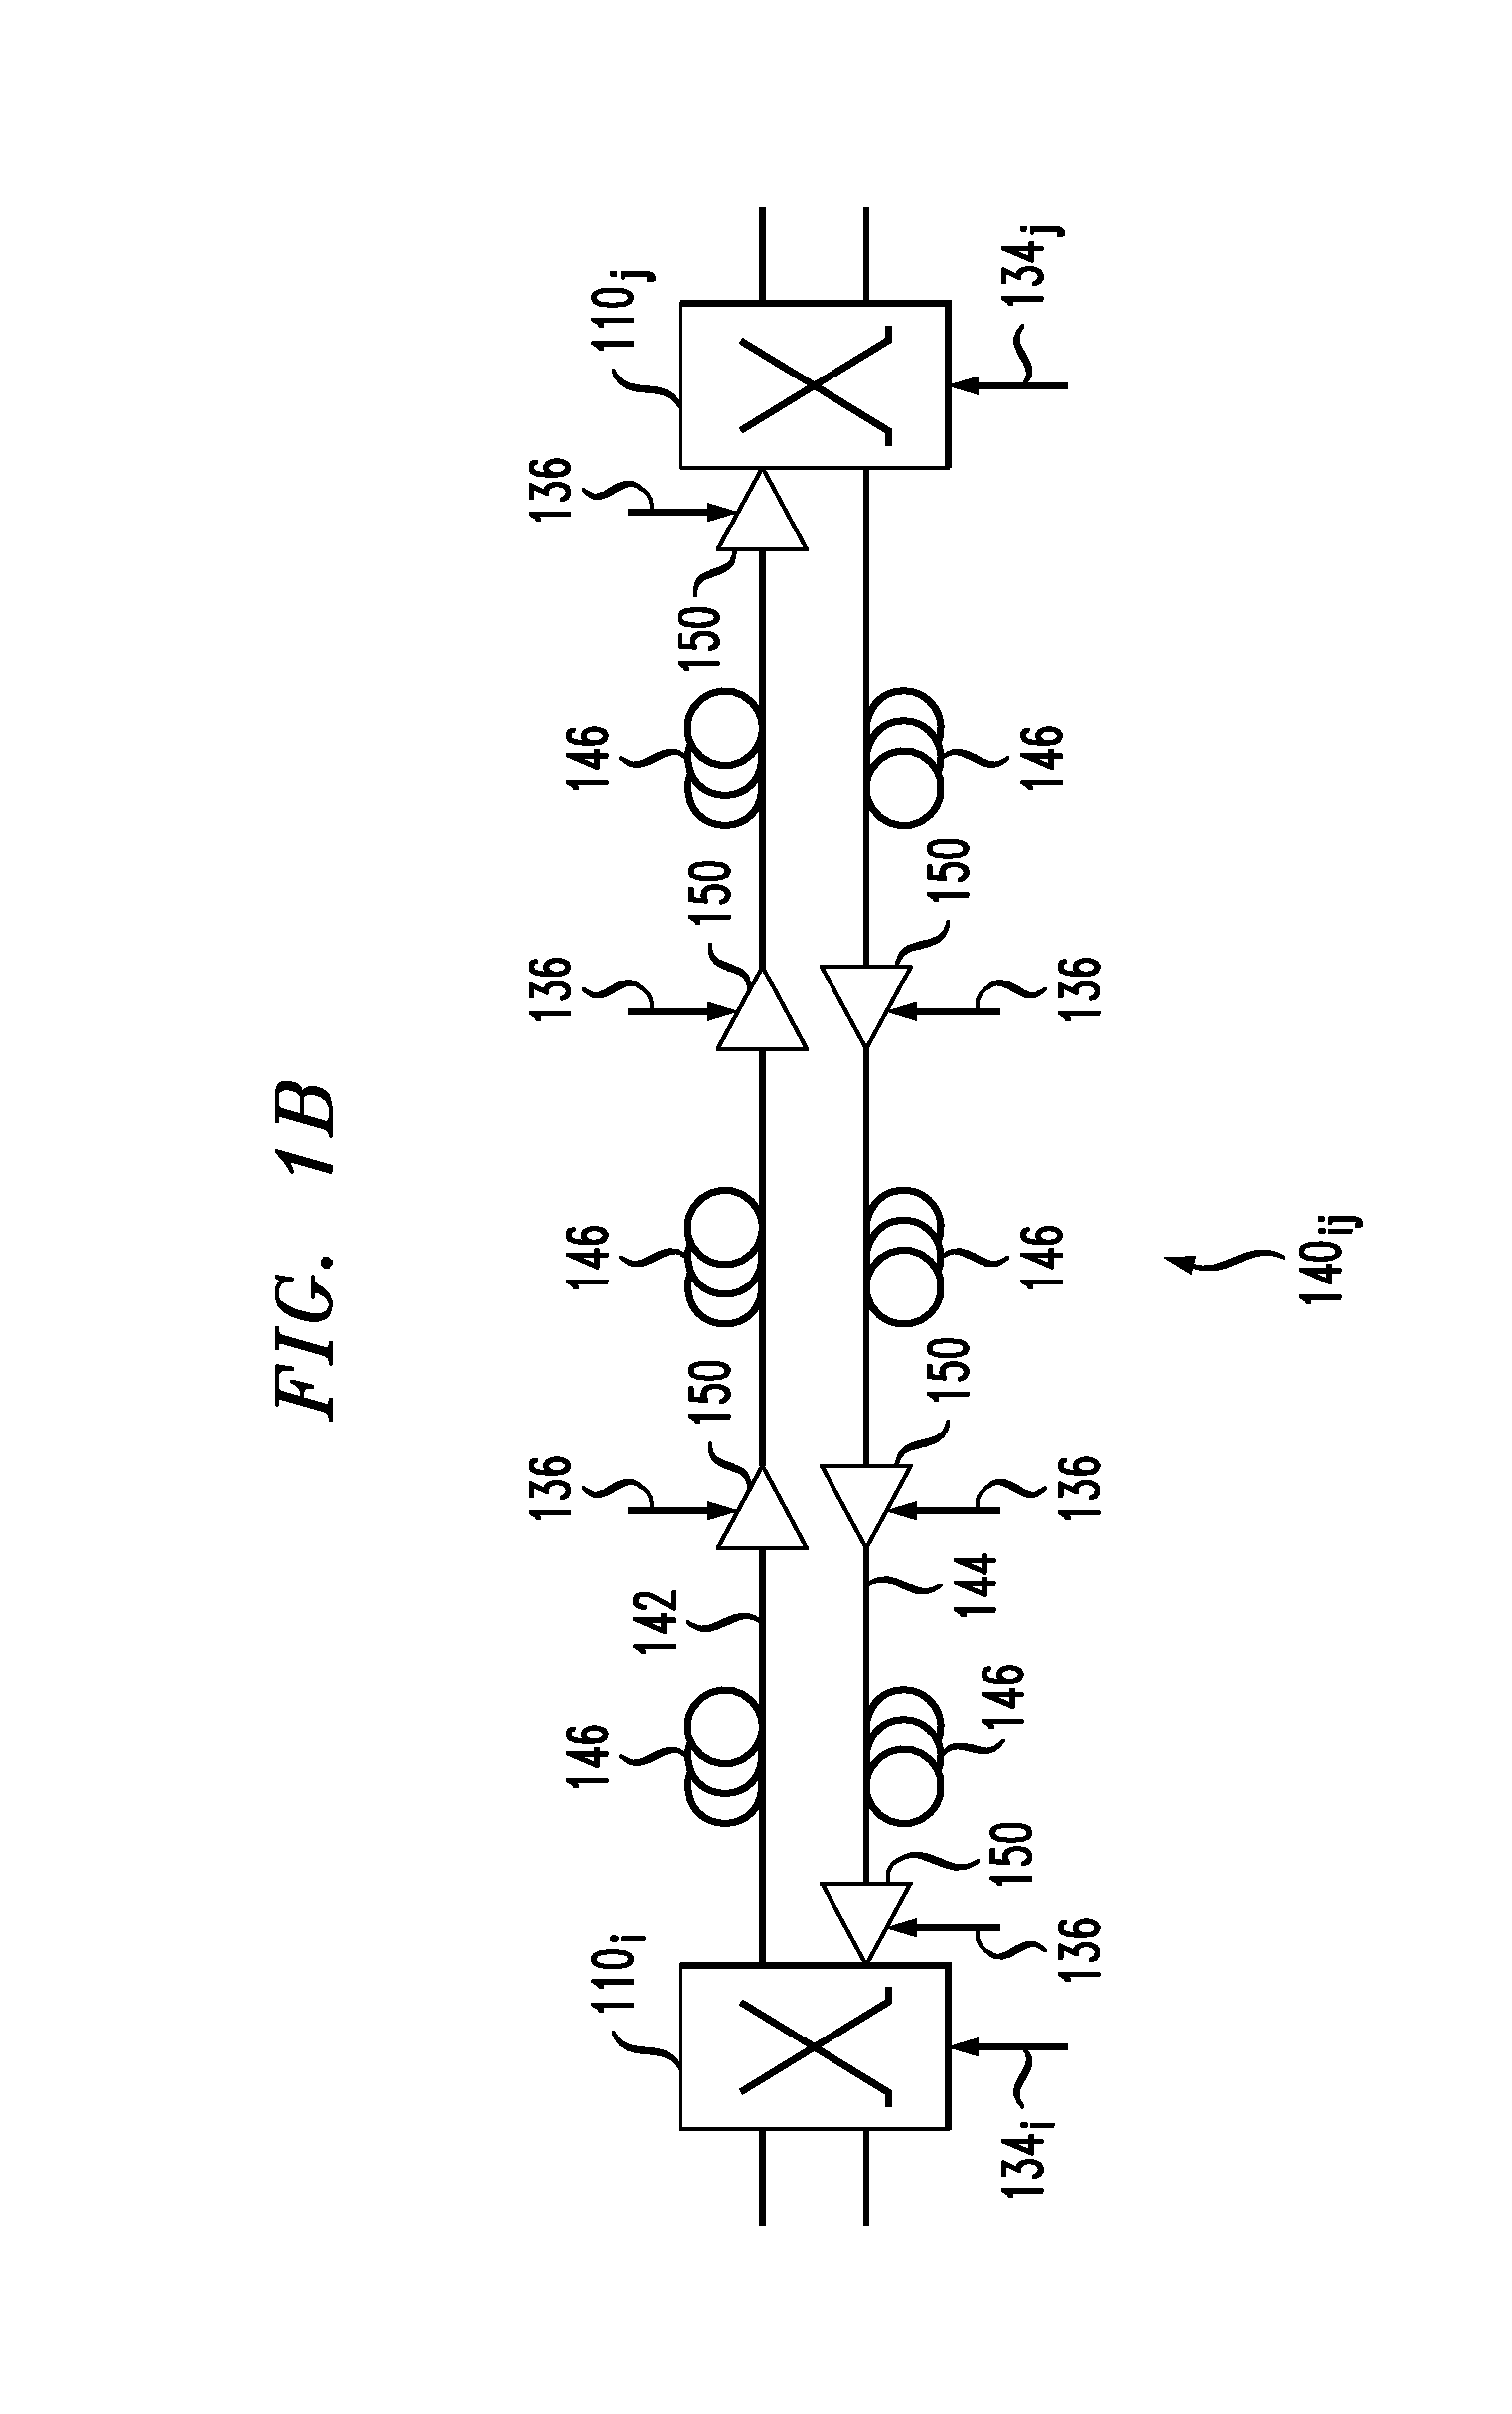 Joint signal-routing and power-control for an optical network